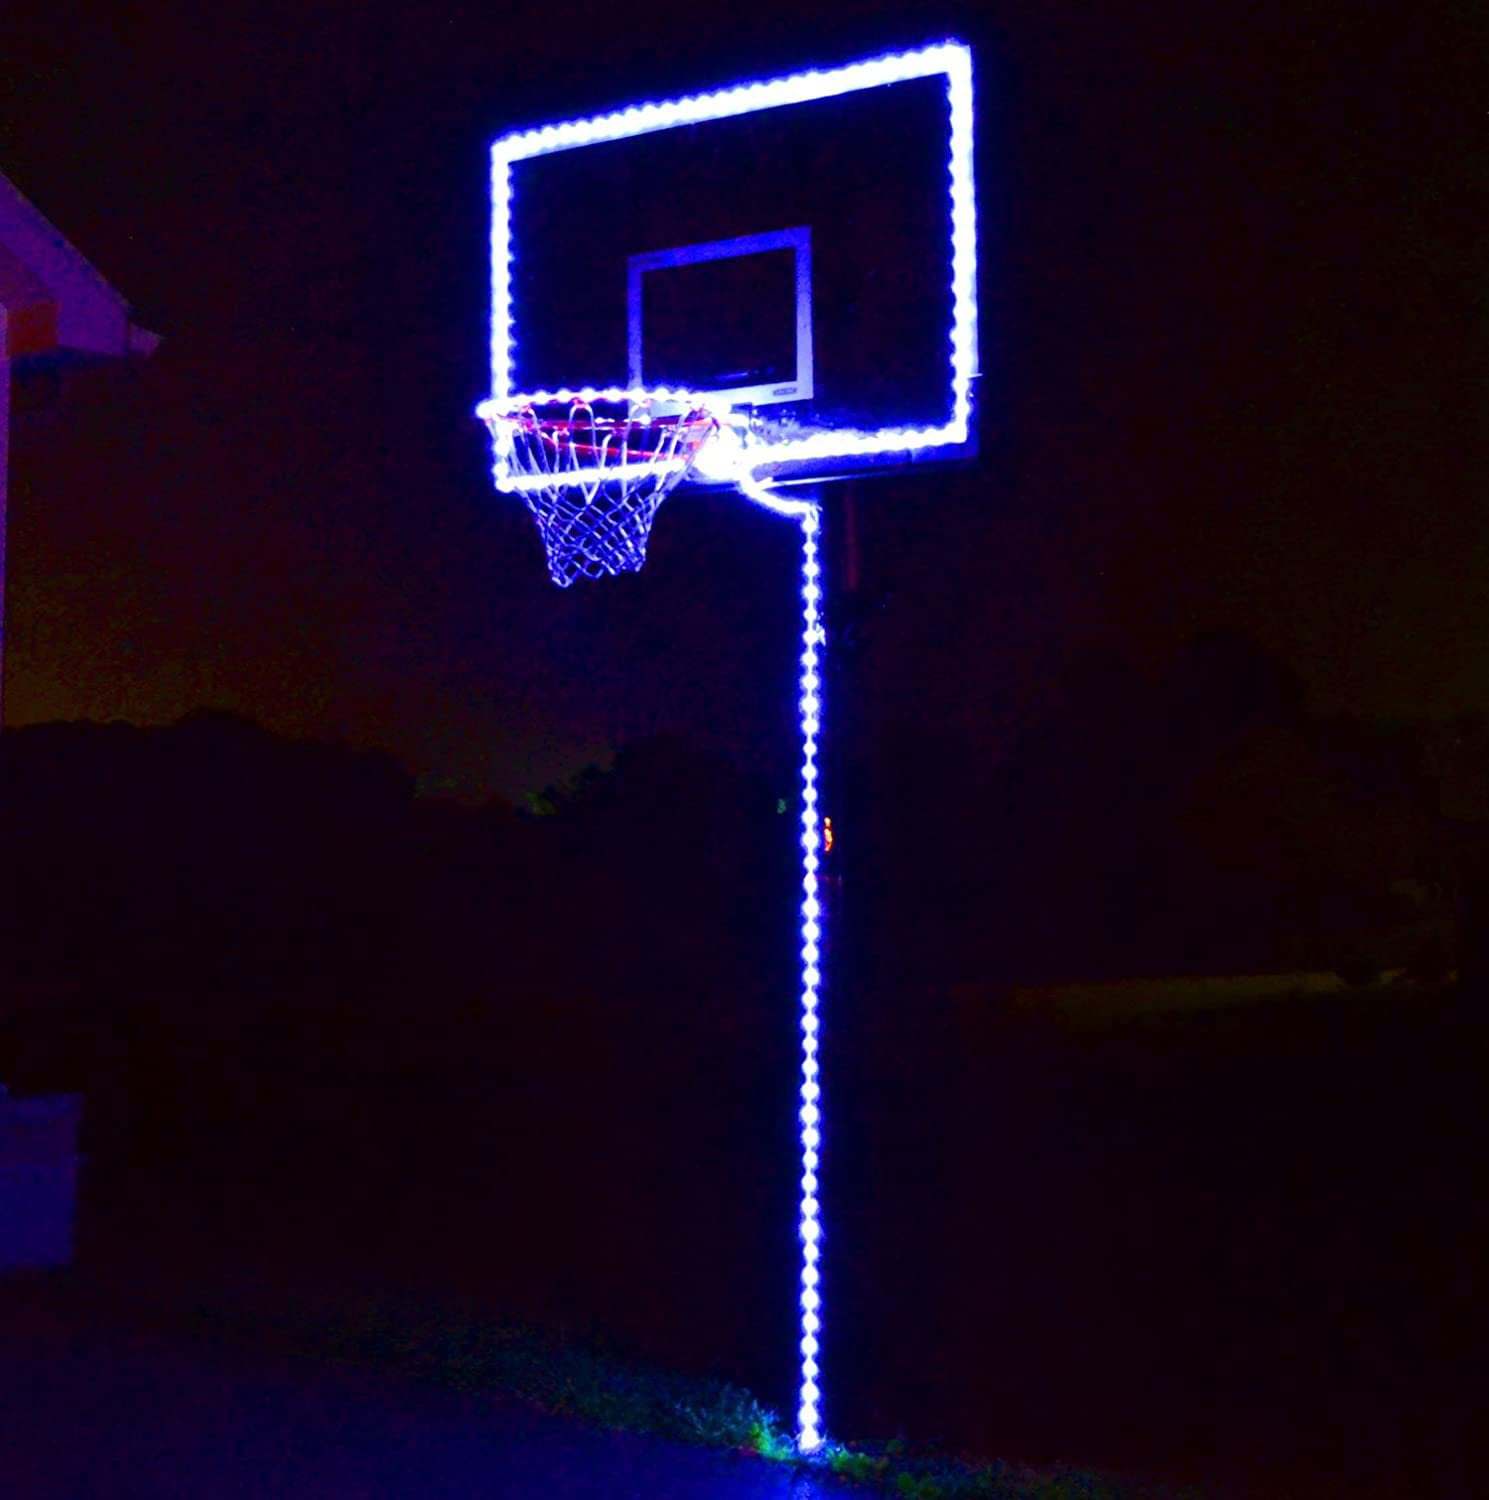 TODRESSUP Lighting The Basketball Hoop Light Led Basketball Net Help You are Shooting at Night Lights Basketball Hoop Lighting kit at Night Lamp